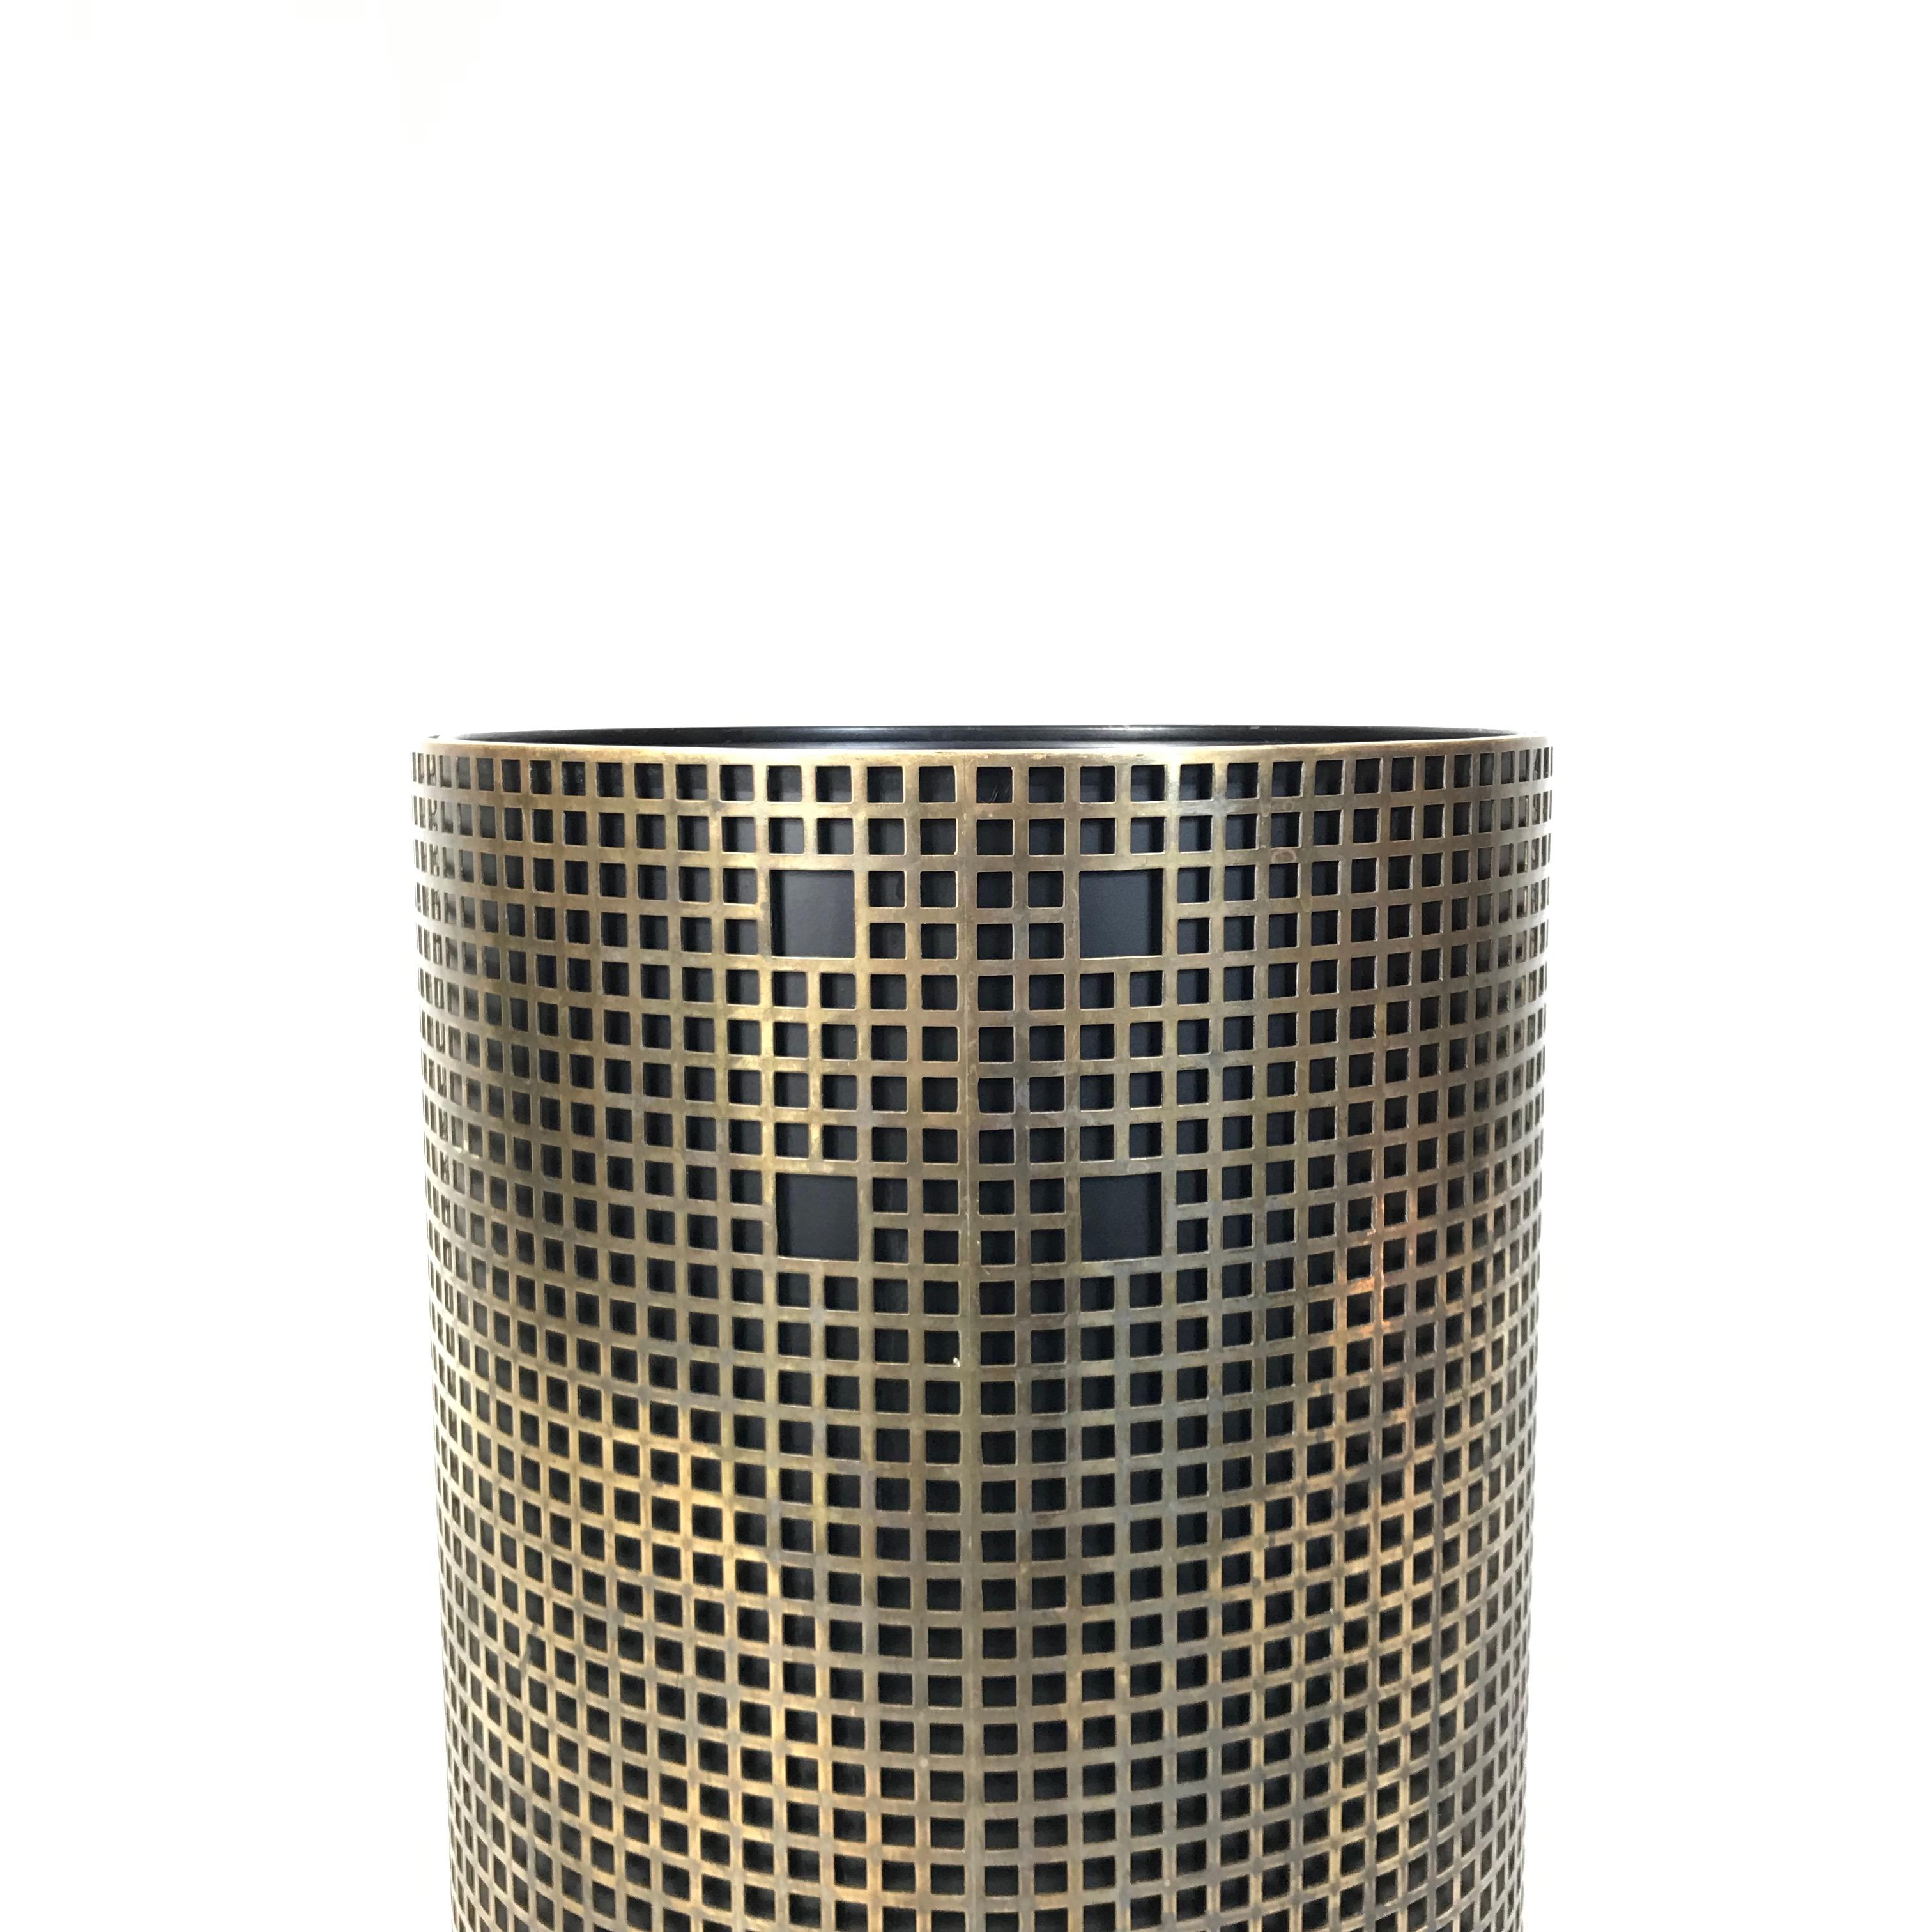 Simple and elegant umbrella stand in style of Josef Hoffmann. Made of perforated brass with lacquered metal basket. Very fine handwork without visible welds. The basket can also be used as a plant pot.

Measures: Height 40 cm / 15.7 in.
Diameter